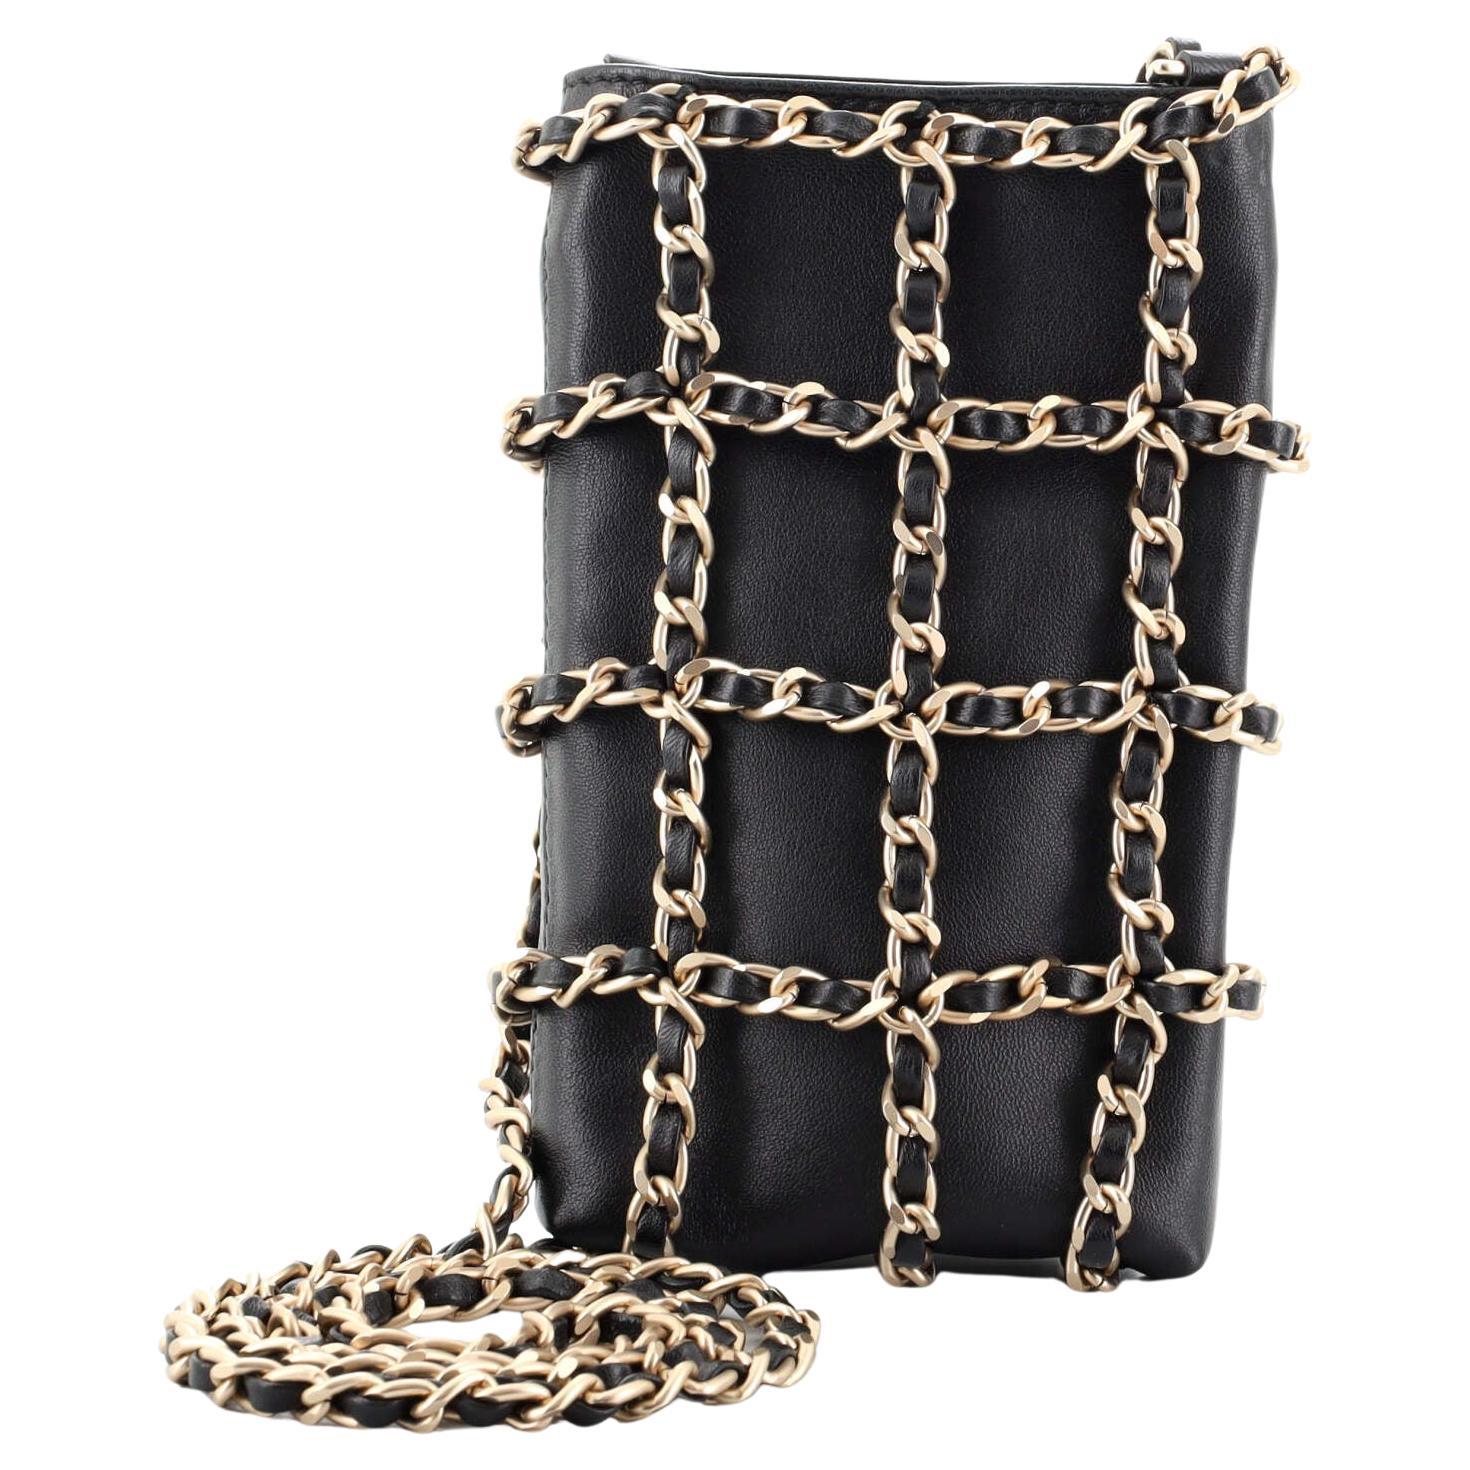 Chanel Chain Frame Phone Clutch with Chain Lambskin